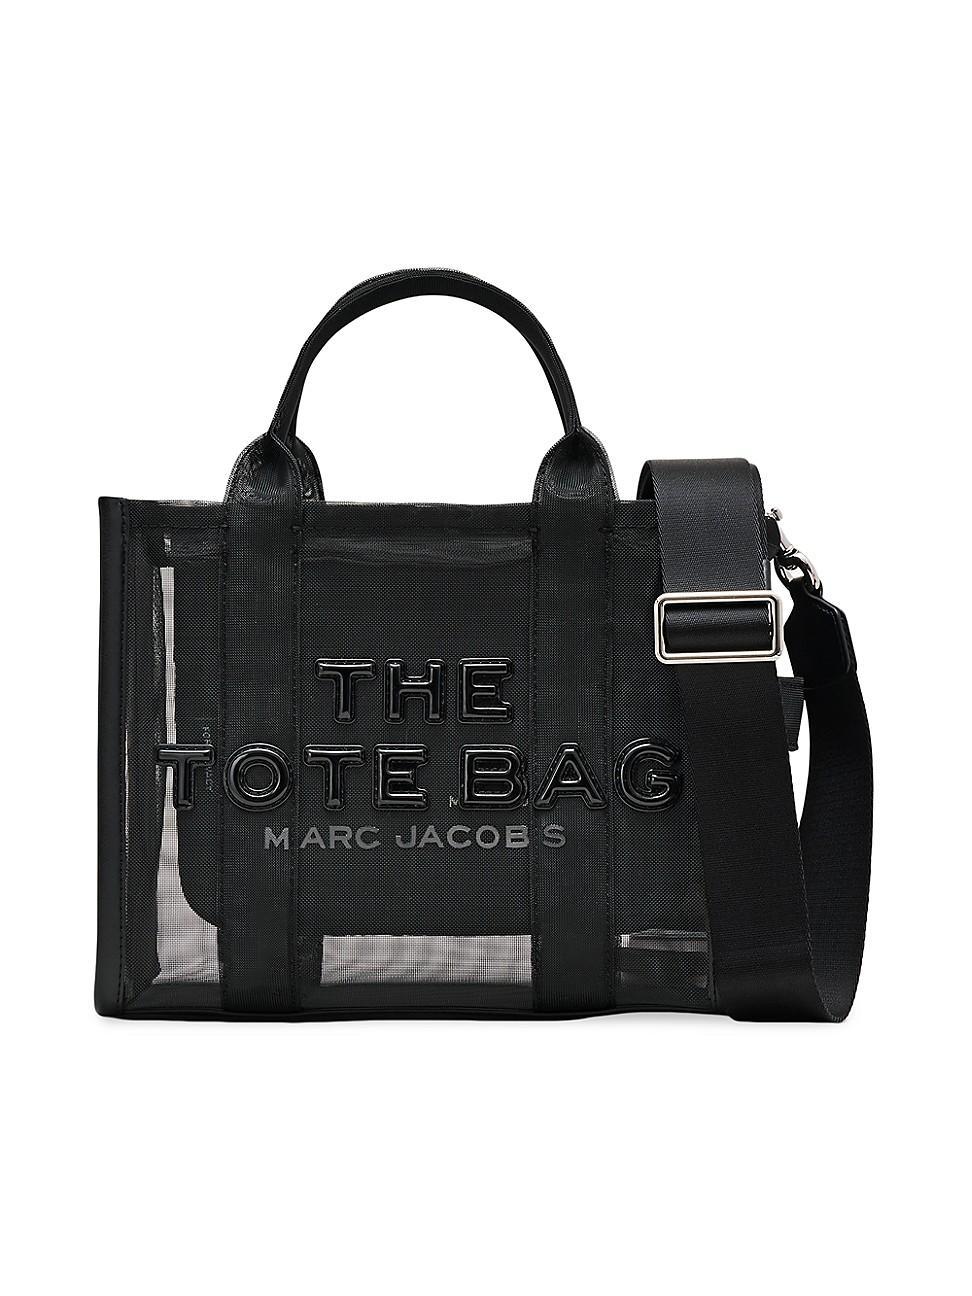 Marc Jacobs The Mesh Small Tote Bag (Blackout) Tote Handbags Product Image